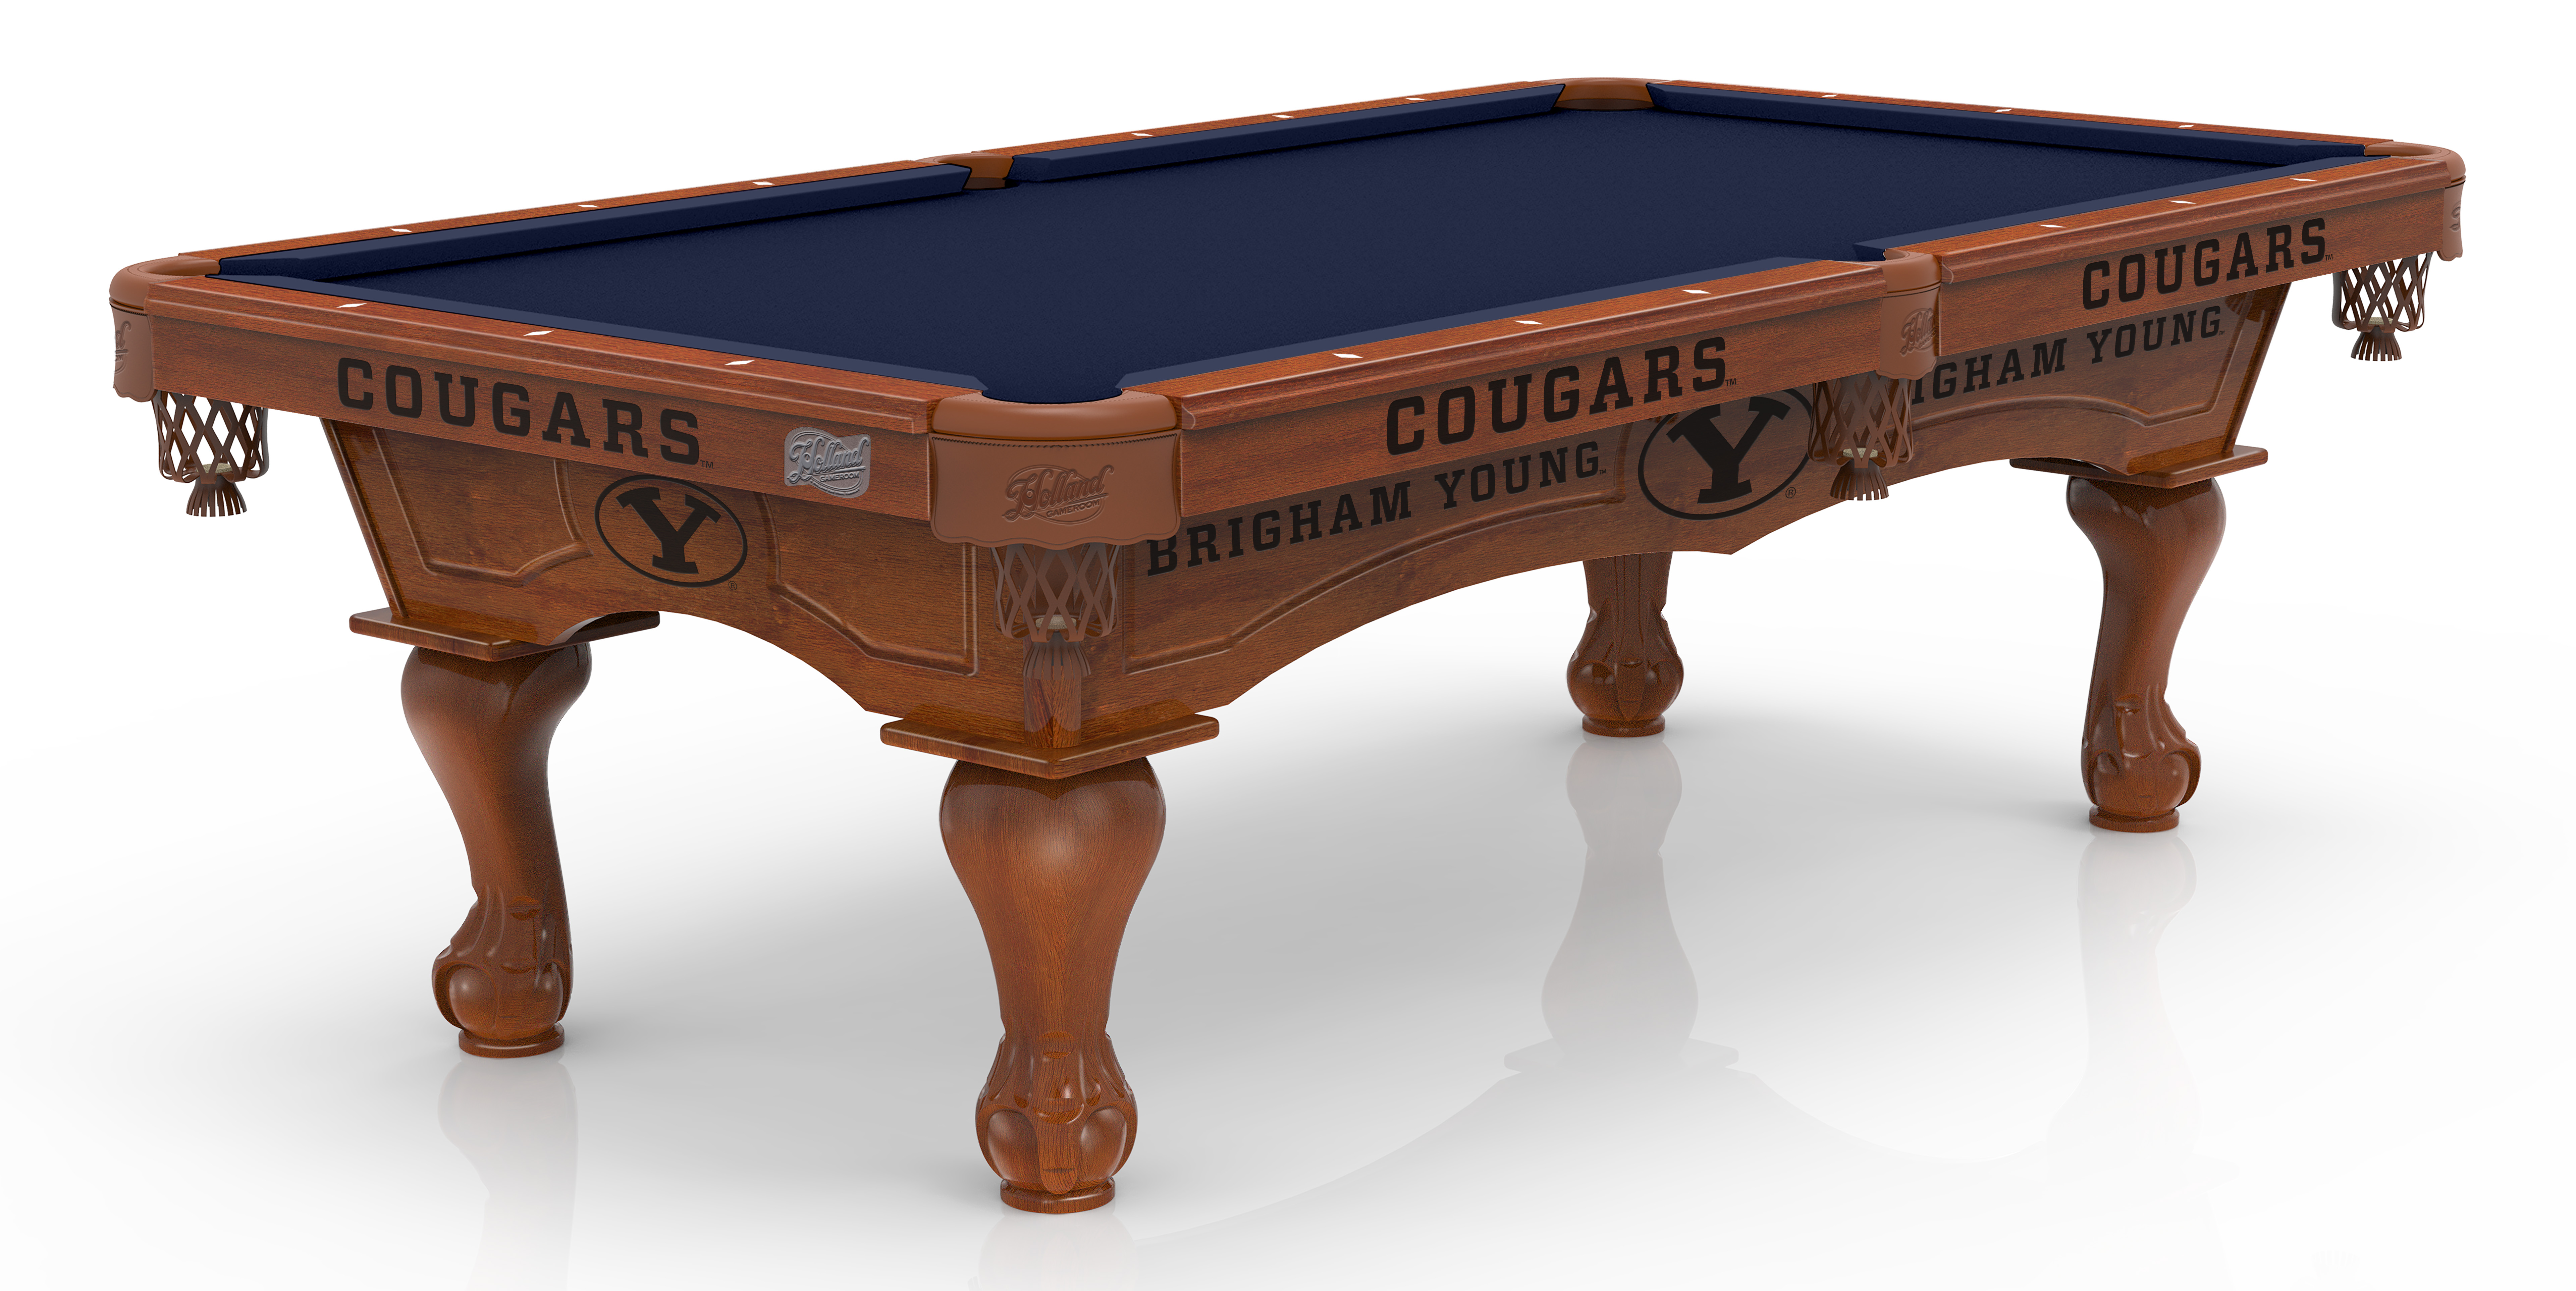 Pt8brigyn-pclplain 8 Ft. Brigham Young Pool Table